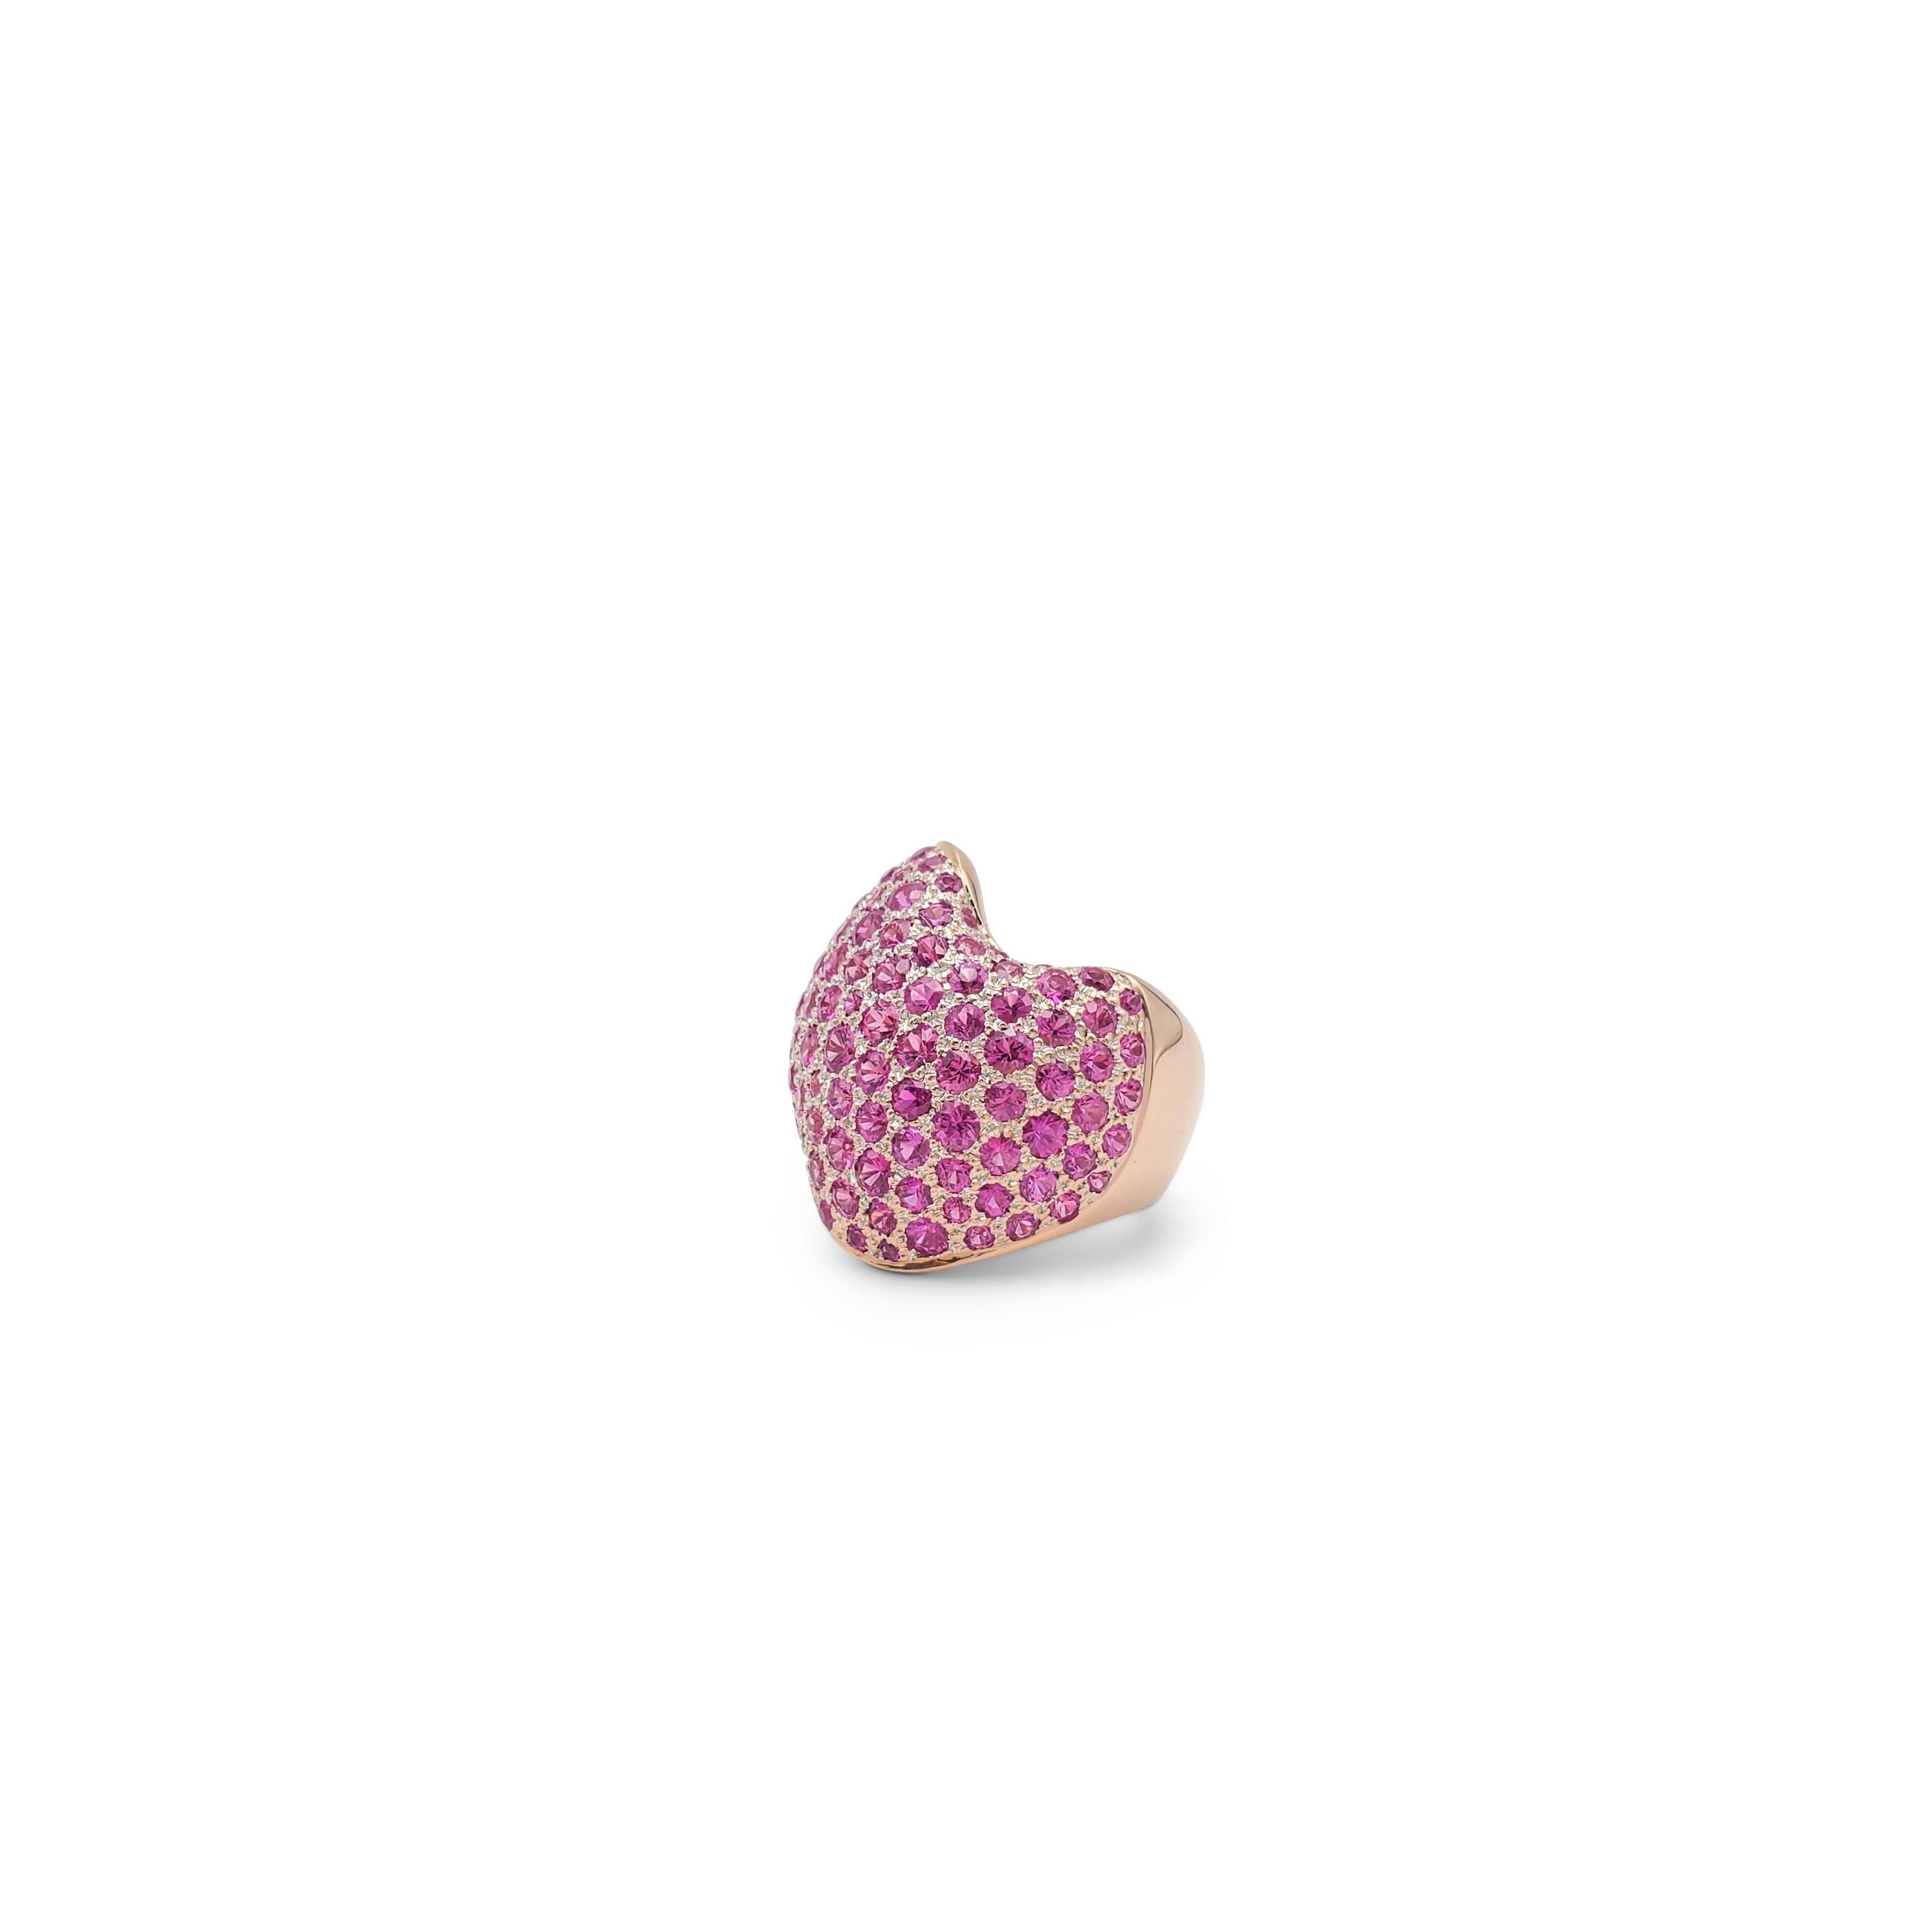 Round Cut Van Cleef & Arpels Rose Gold and Pink Sapphire Ring